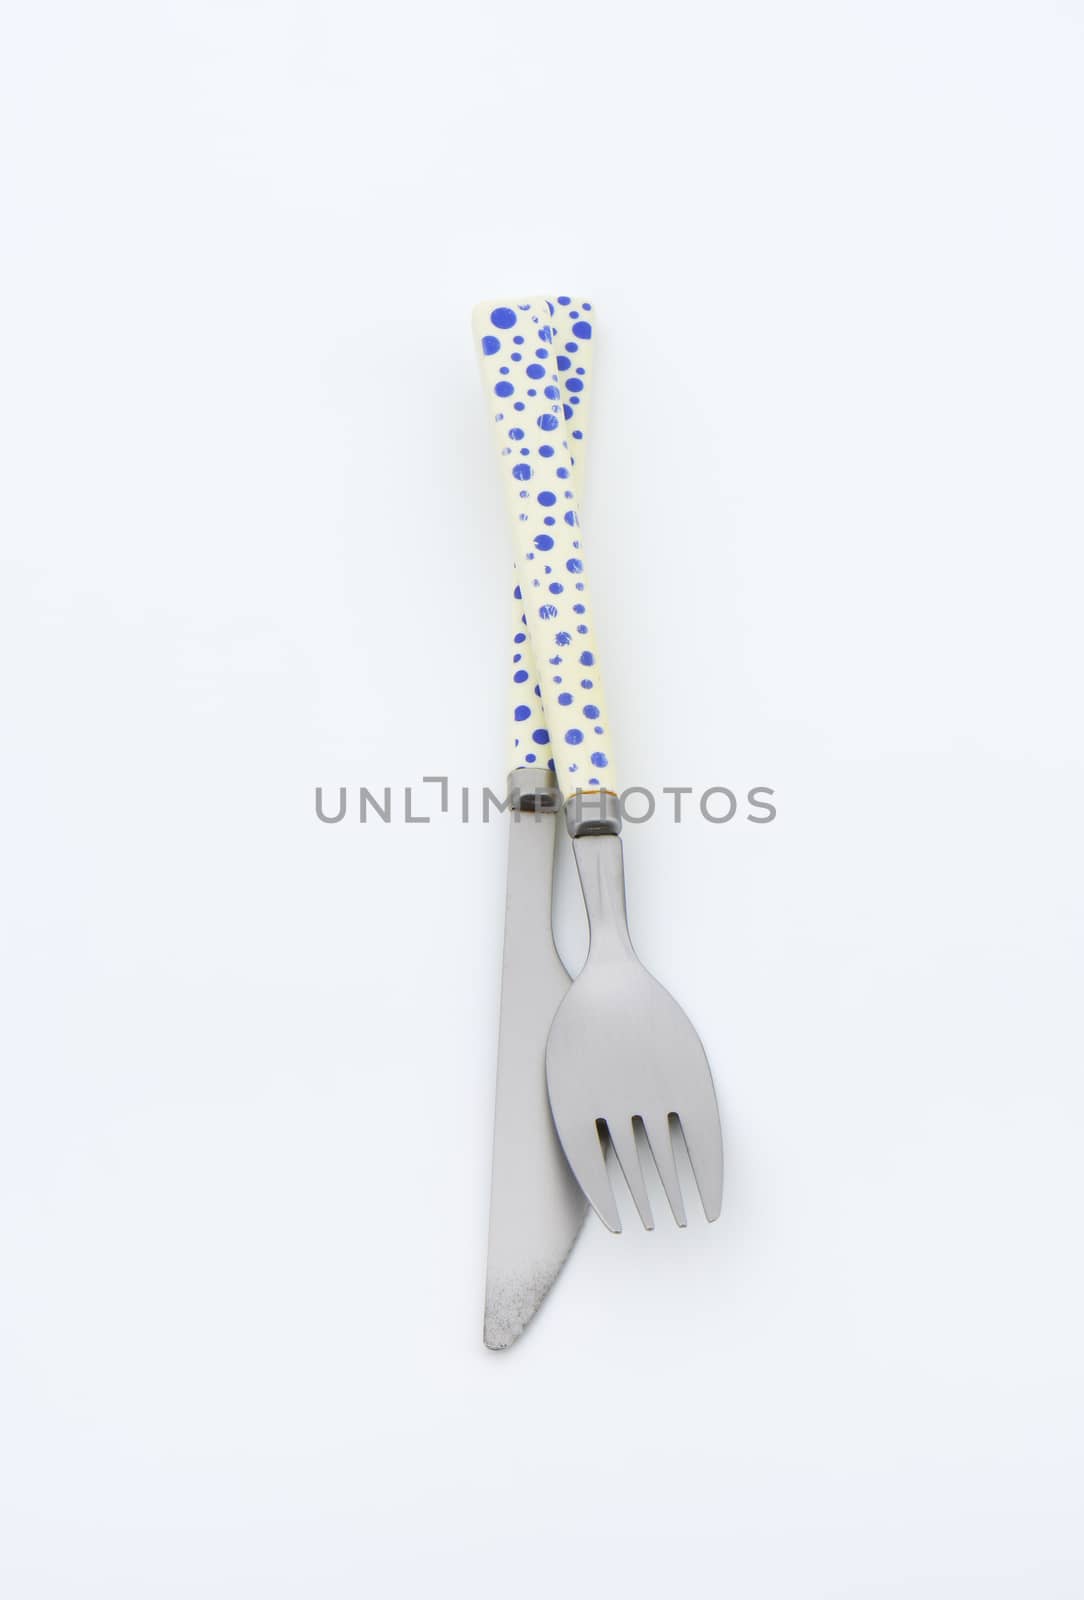 Knife and fork by Digifoodstock